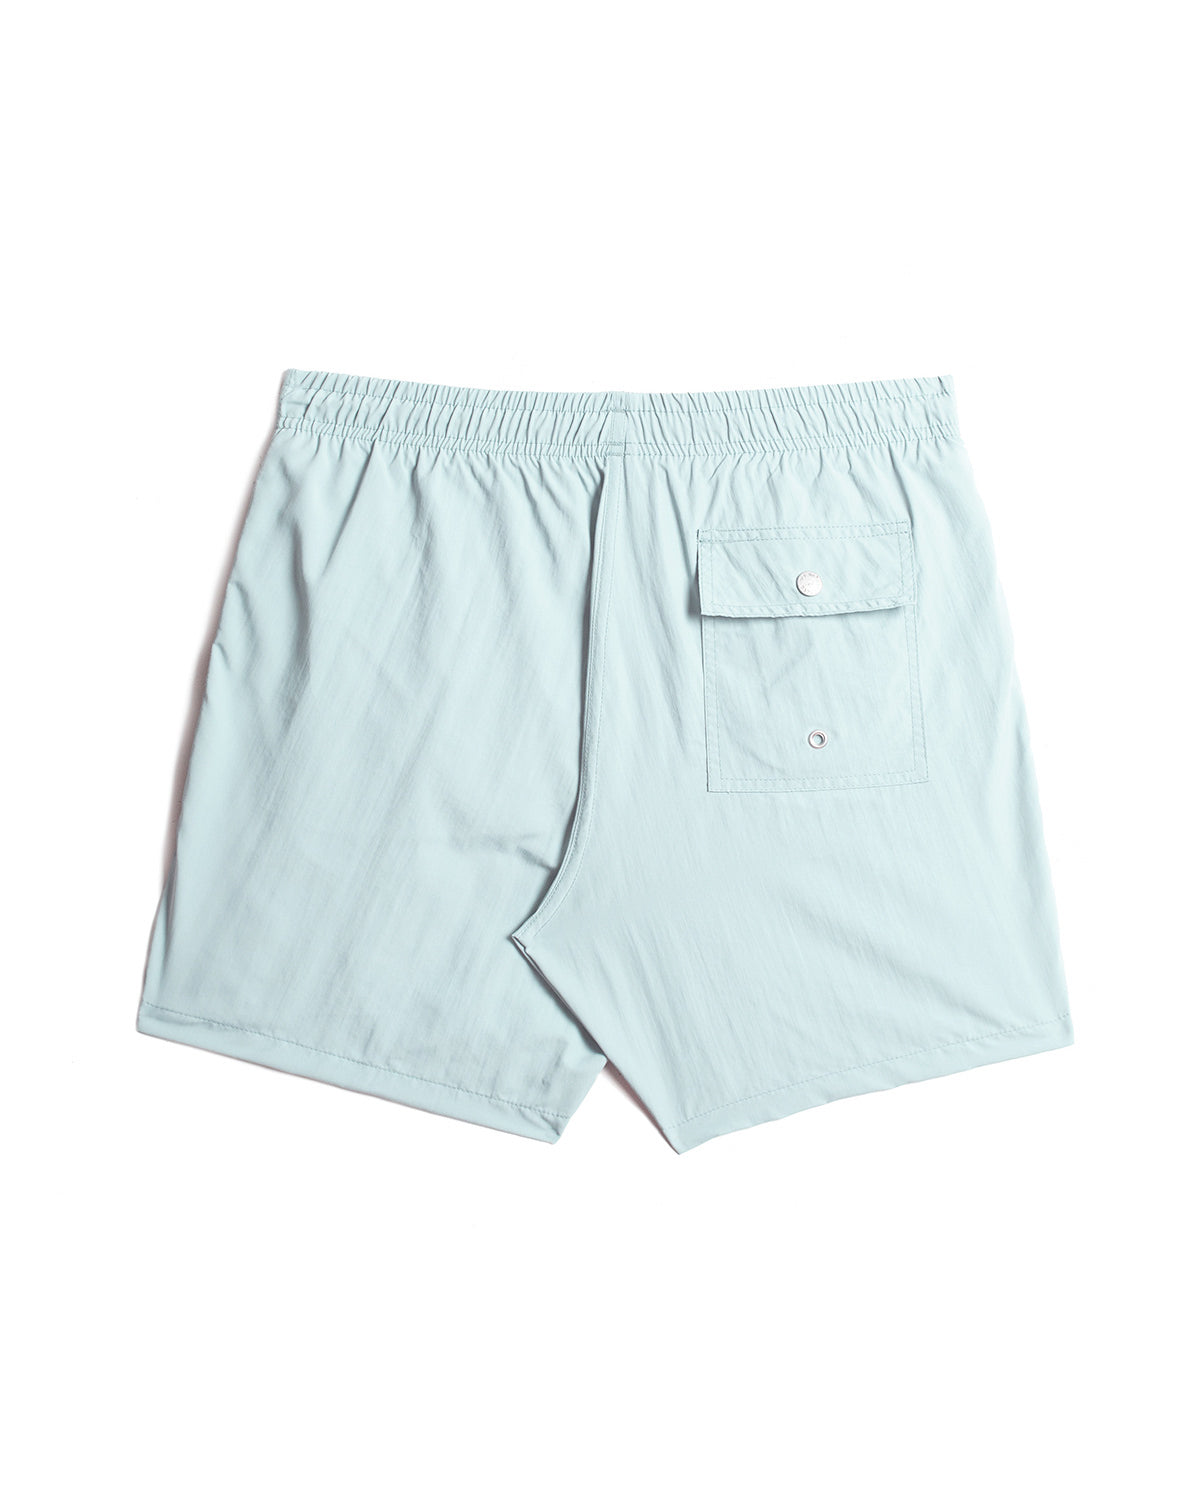 Solid Baby Blue Swim Trunk back view